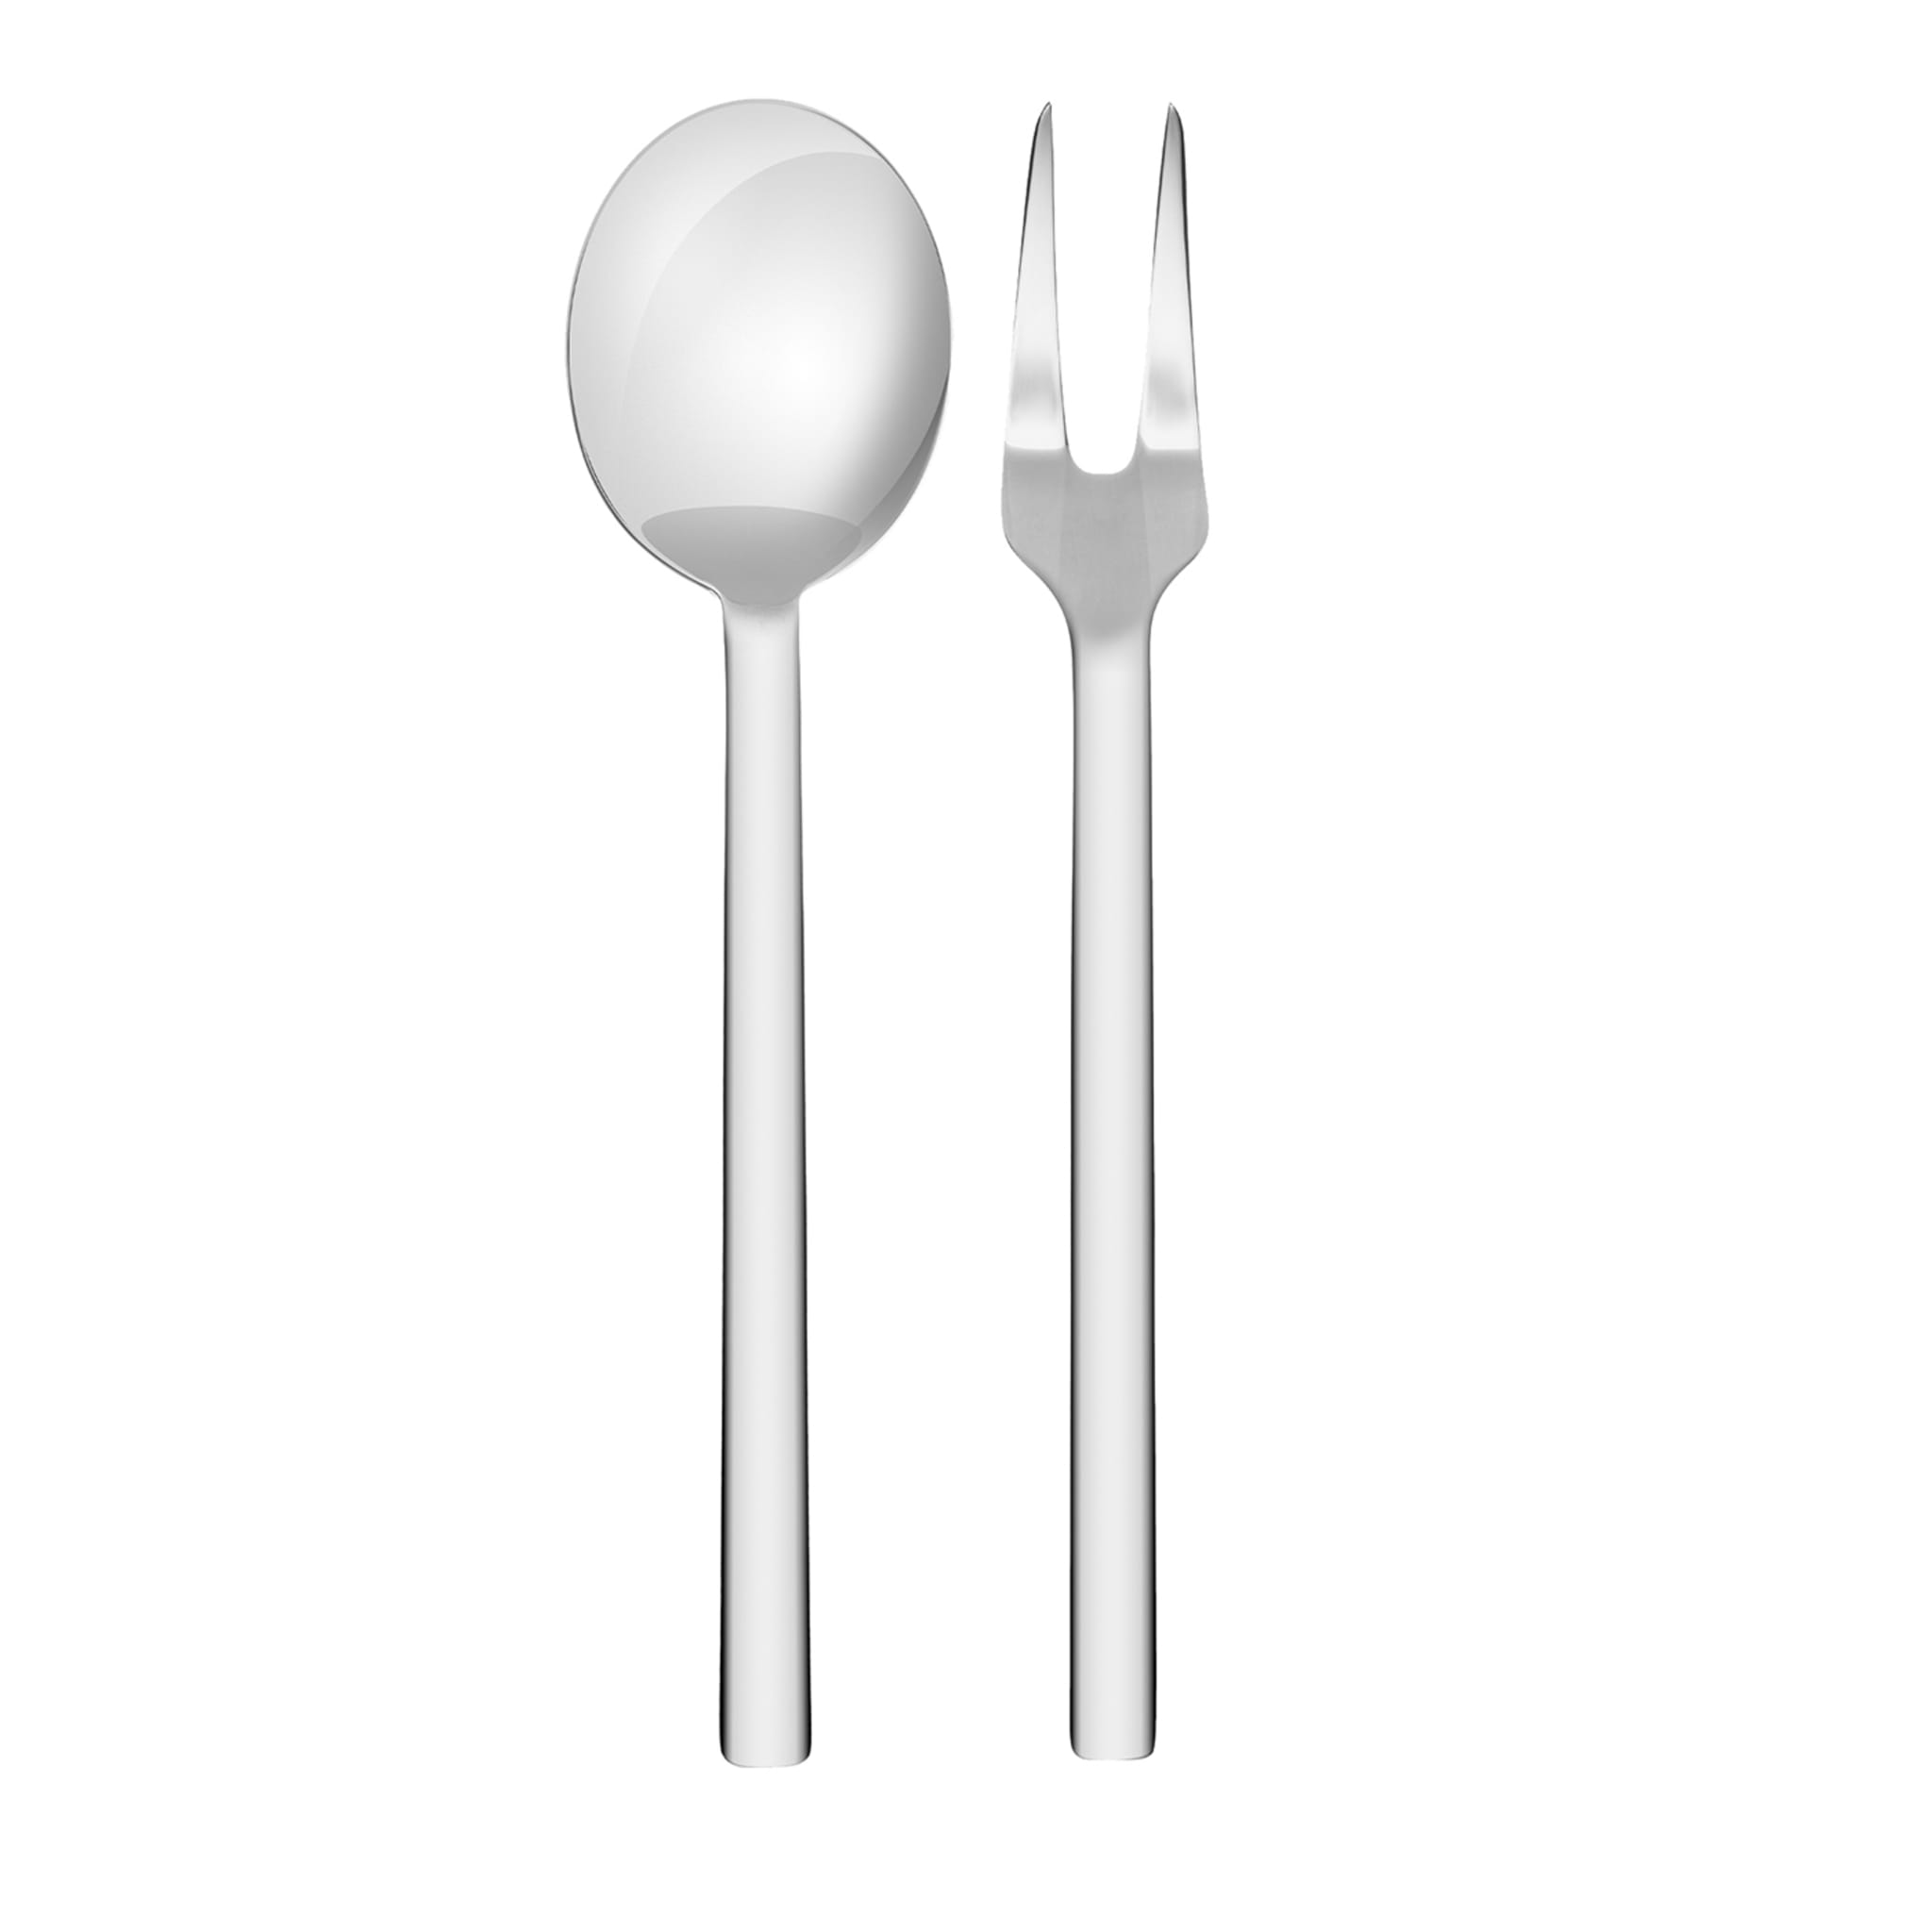 STILE Set of Serving spoon and Serving fork by Pininfarina - Main view